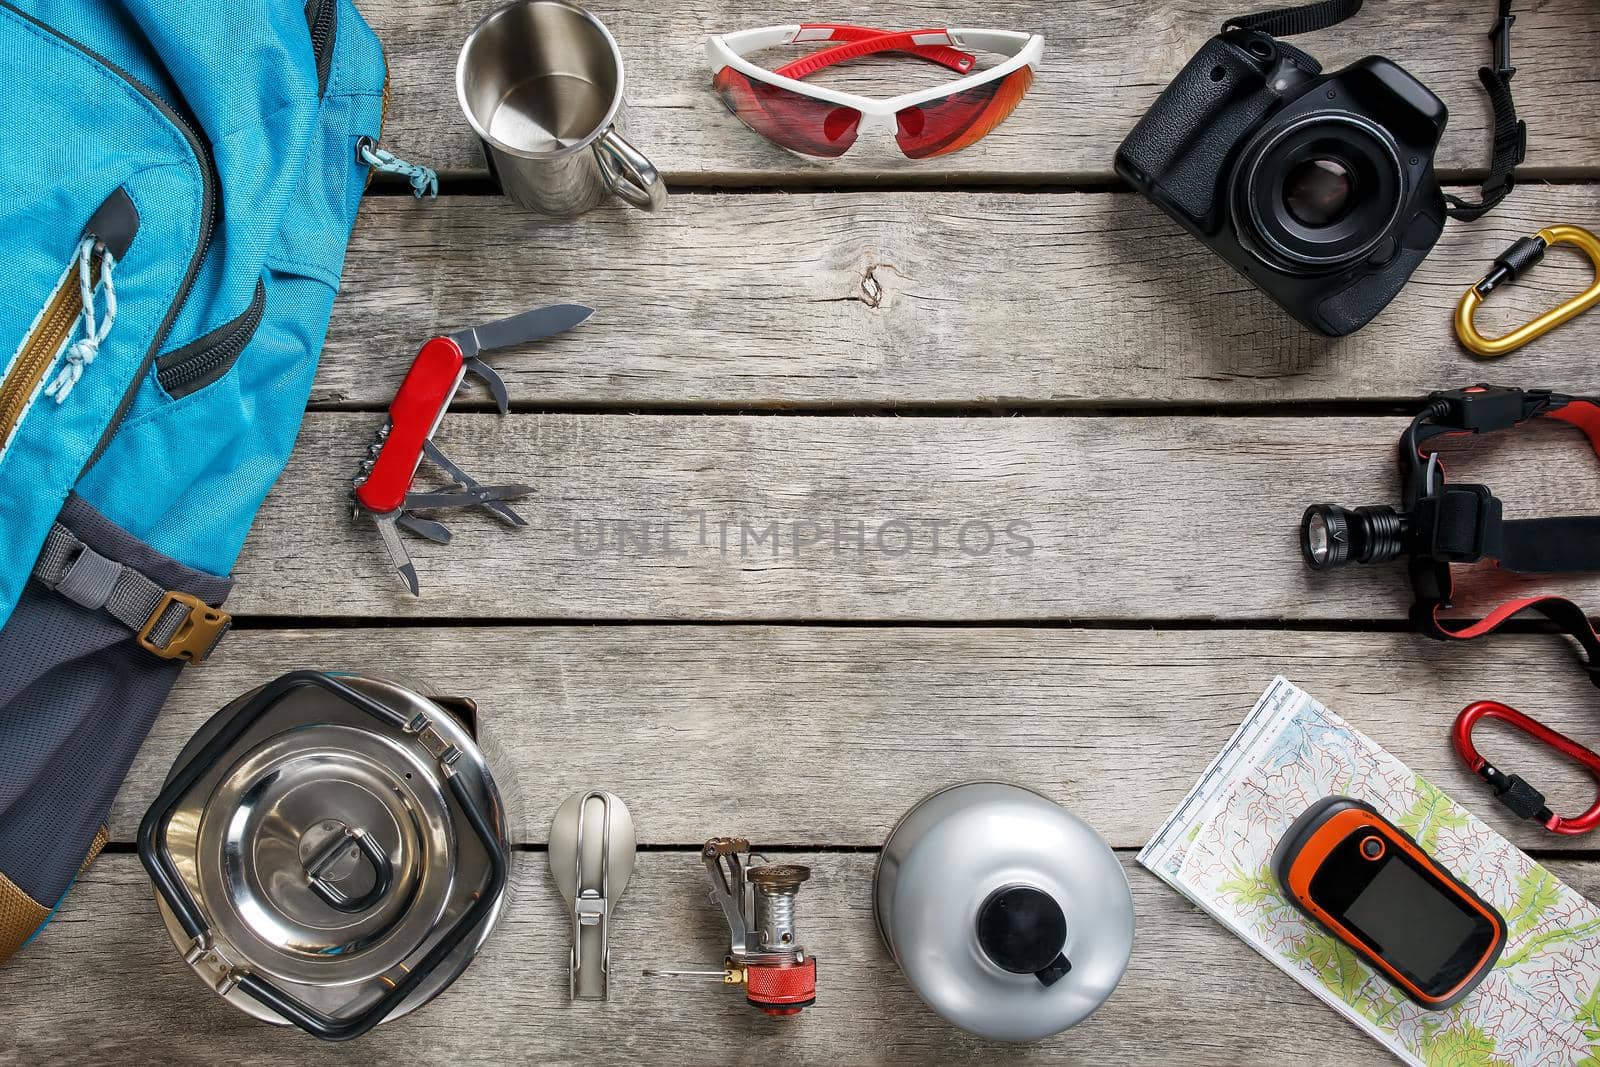 Top view of tourist equipment for travel and tourism on a rustic light wooden floor with an empty space in the middle. Items include a kettle, a card, a knife, a rope, a carbine, a flashlight, shoes, GPS, a gas bottle, a burner, a spoon, a mug, a camera, glasses, a backpack.